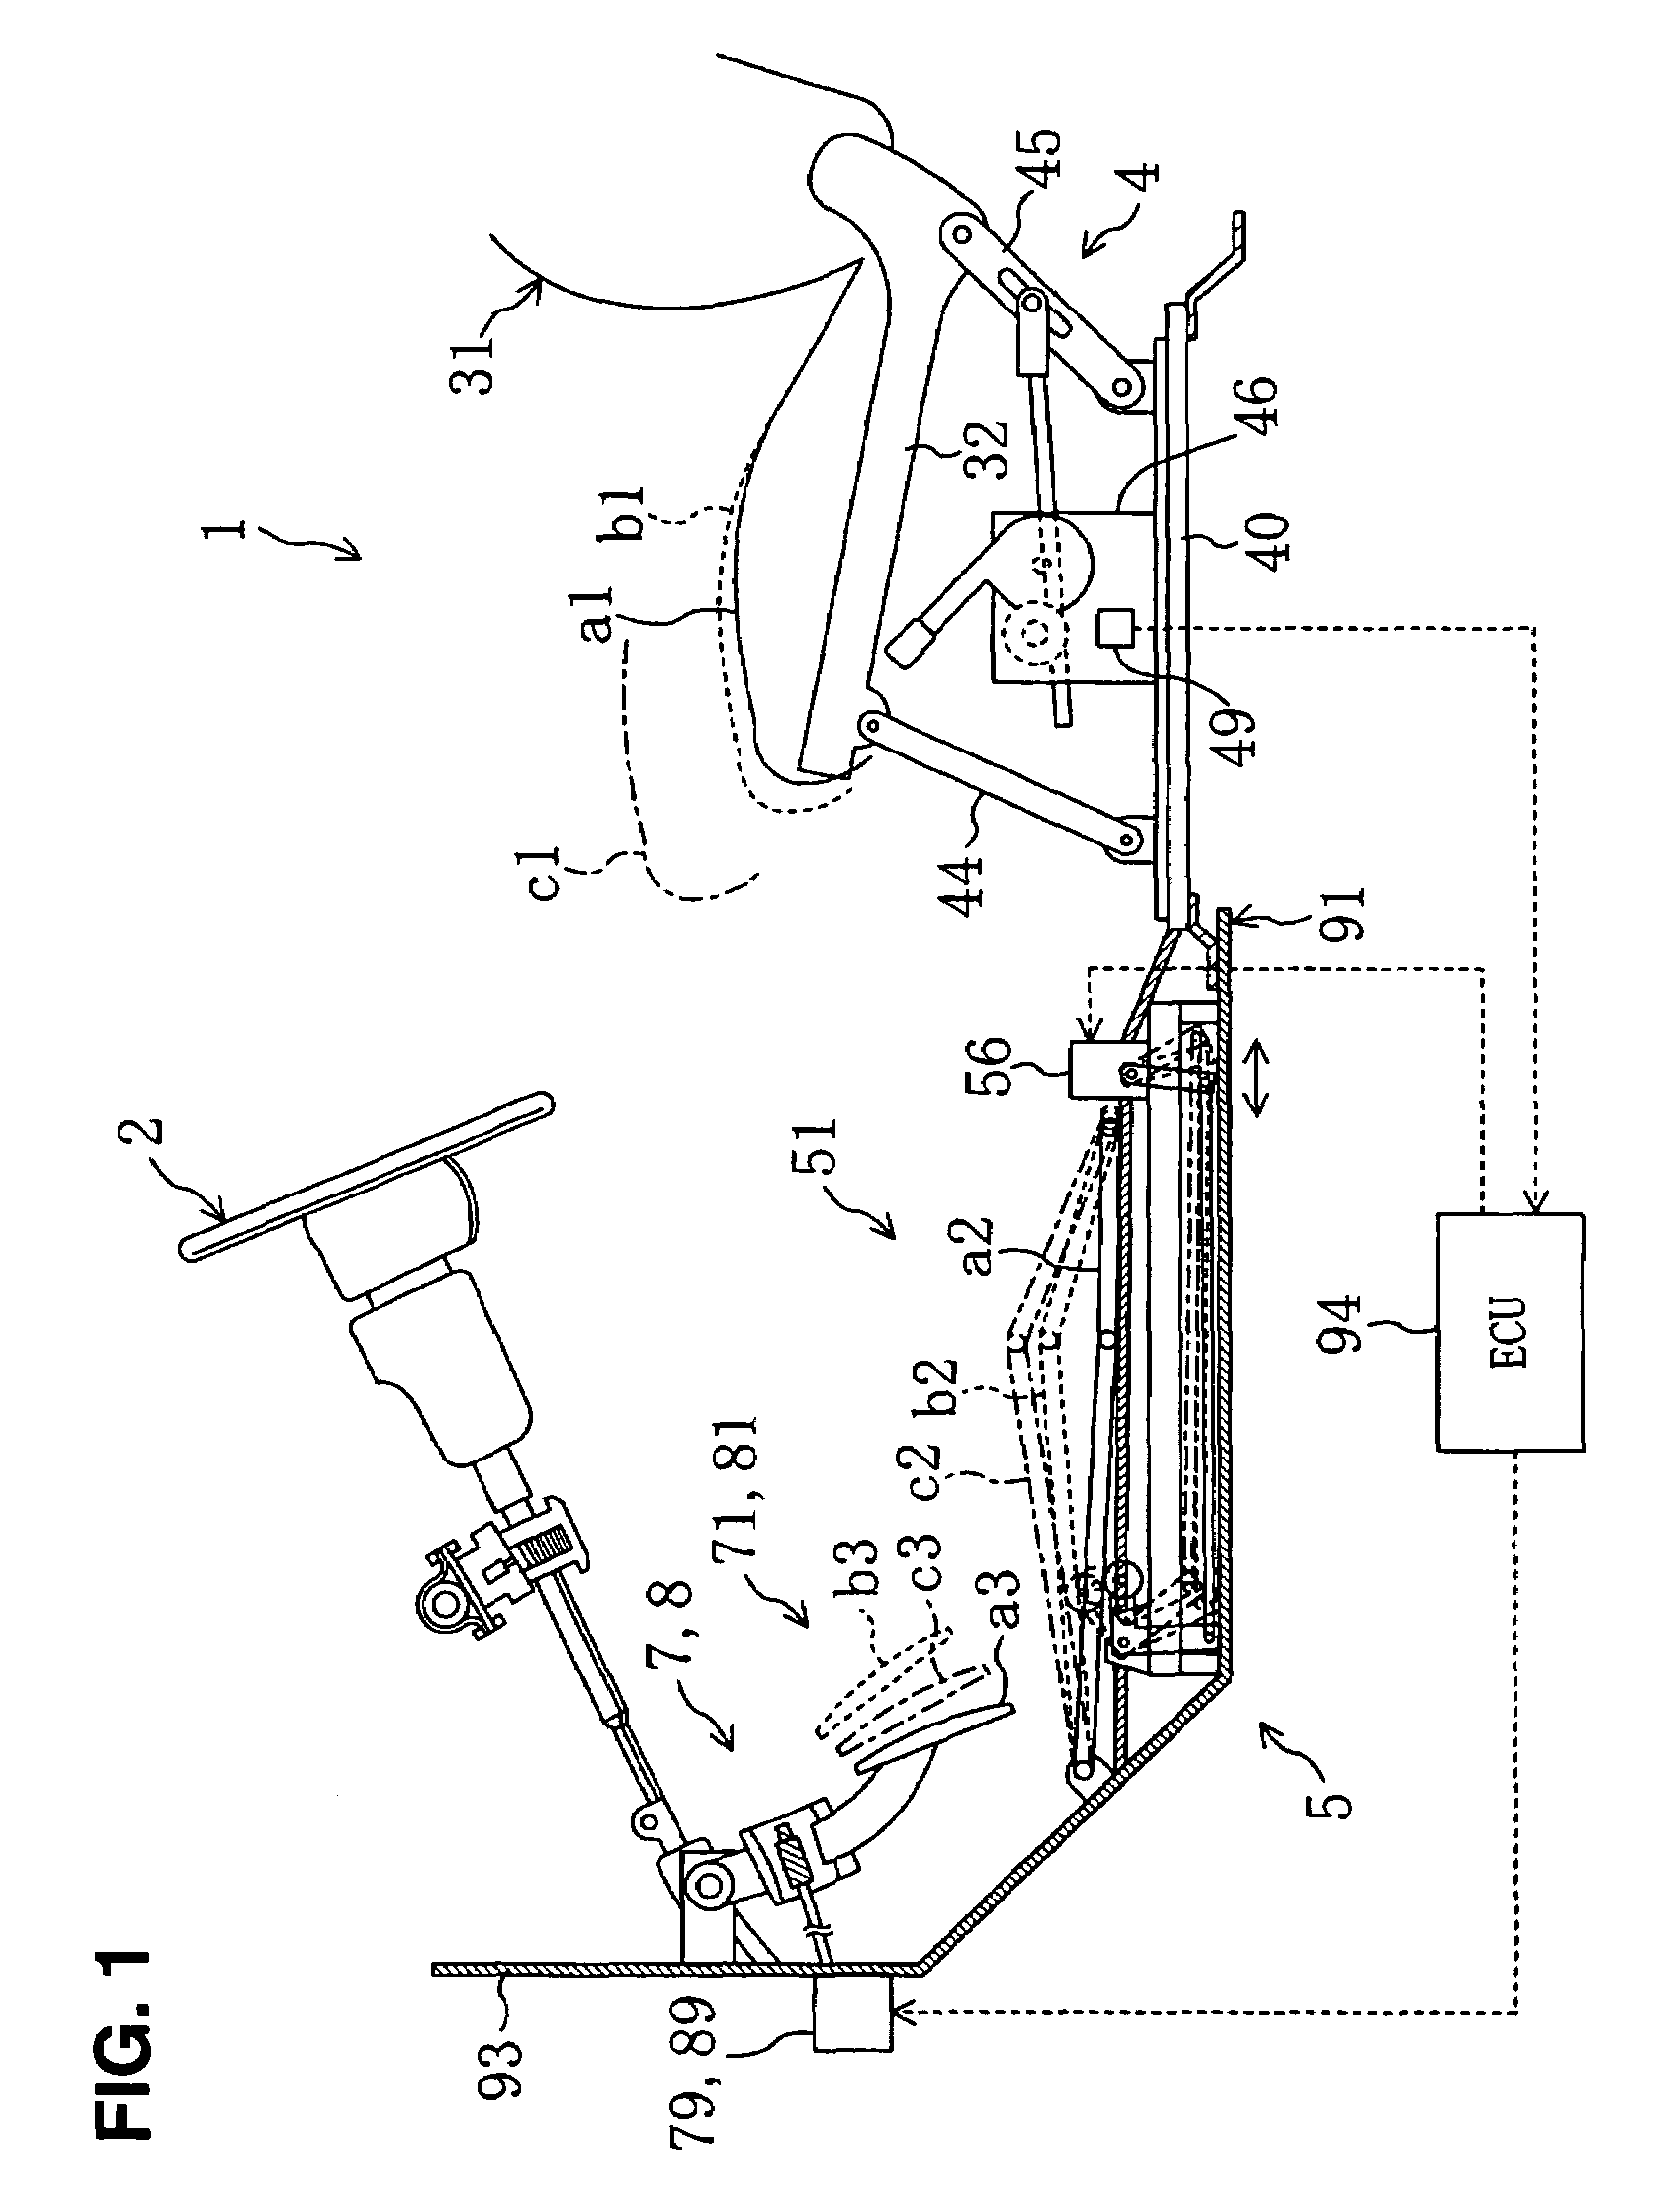 Driving position adjusting device for automotive vehicle